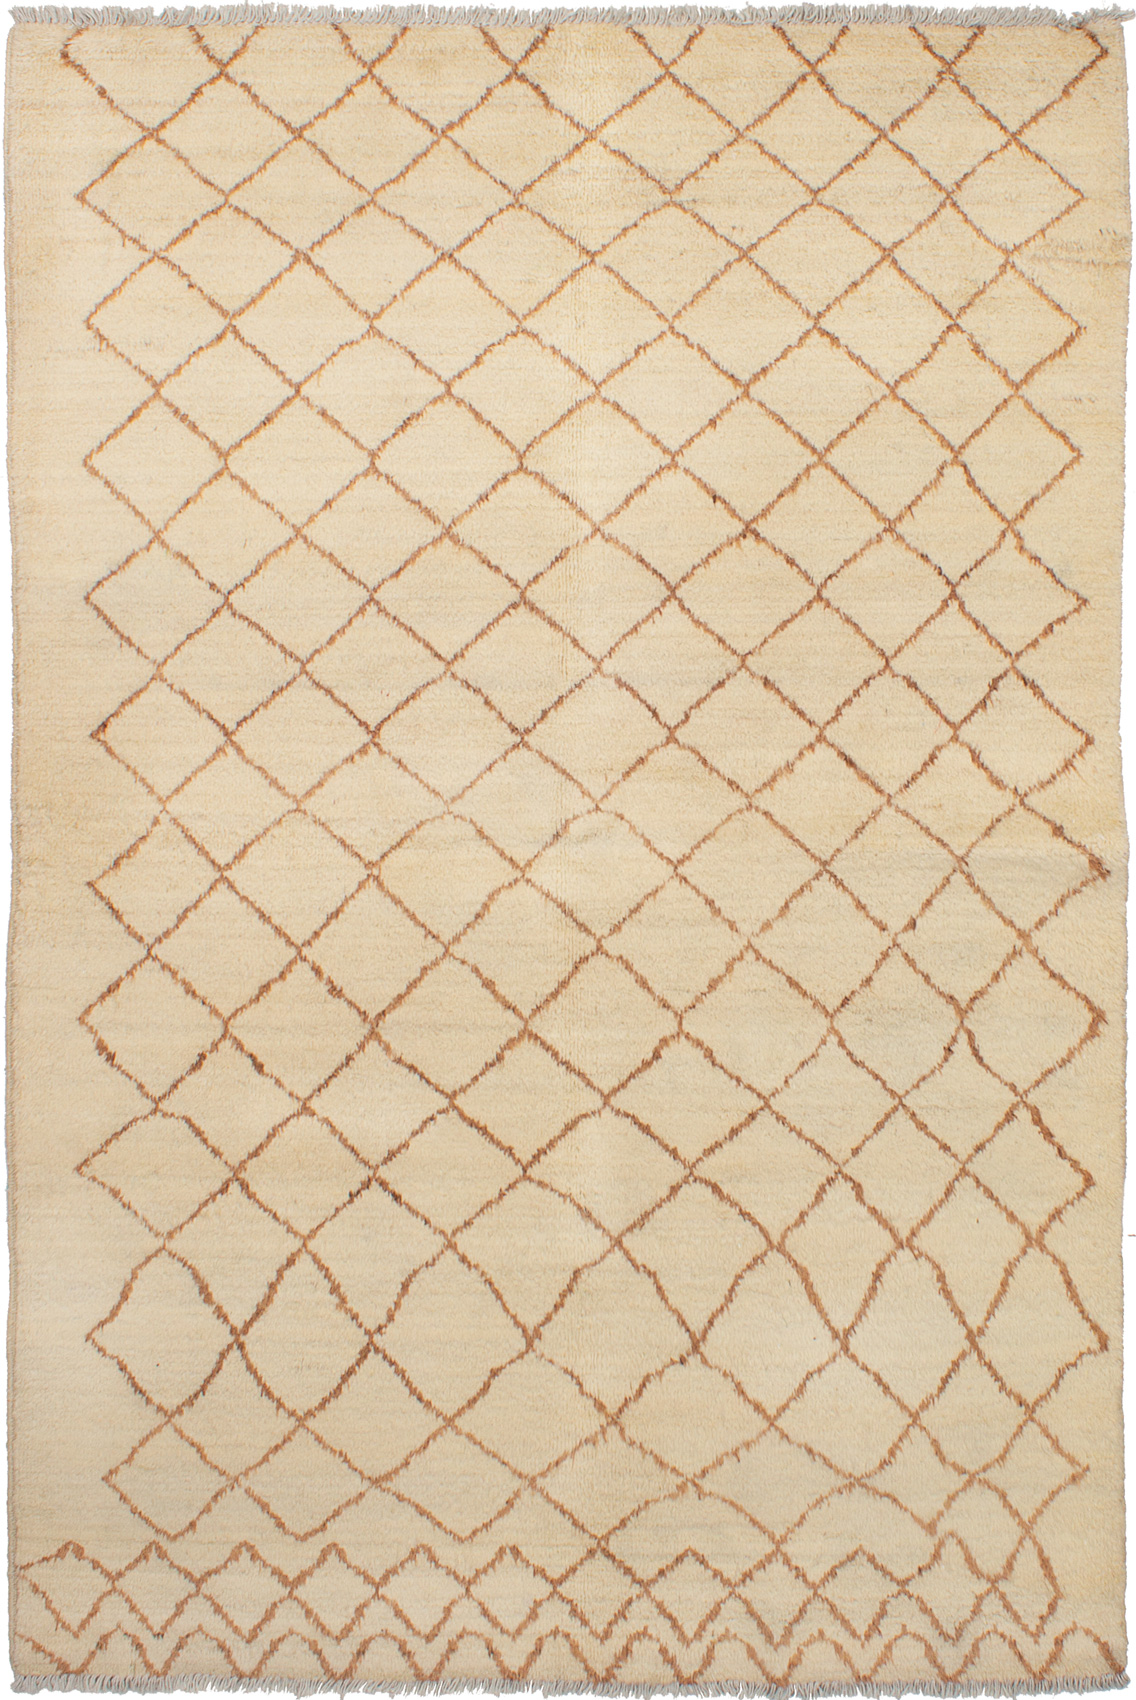 Hand-knotted Tangier Cream Wool Rug 5'10" x 9'0" Size: 5'10" x 9'0"  